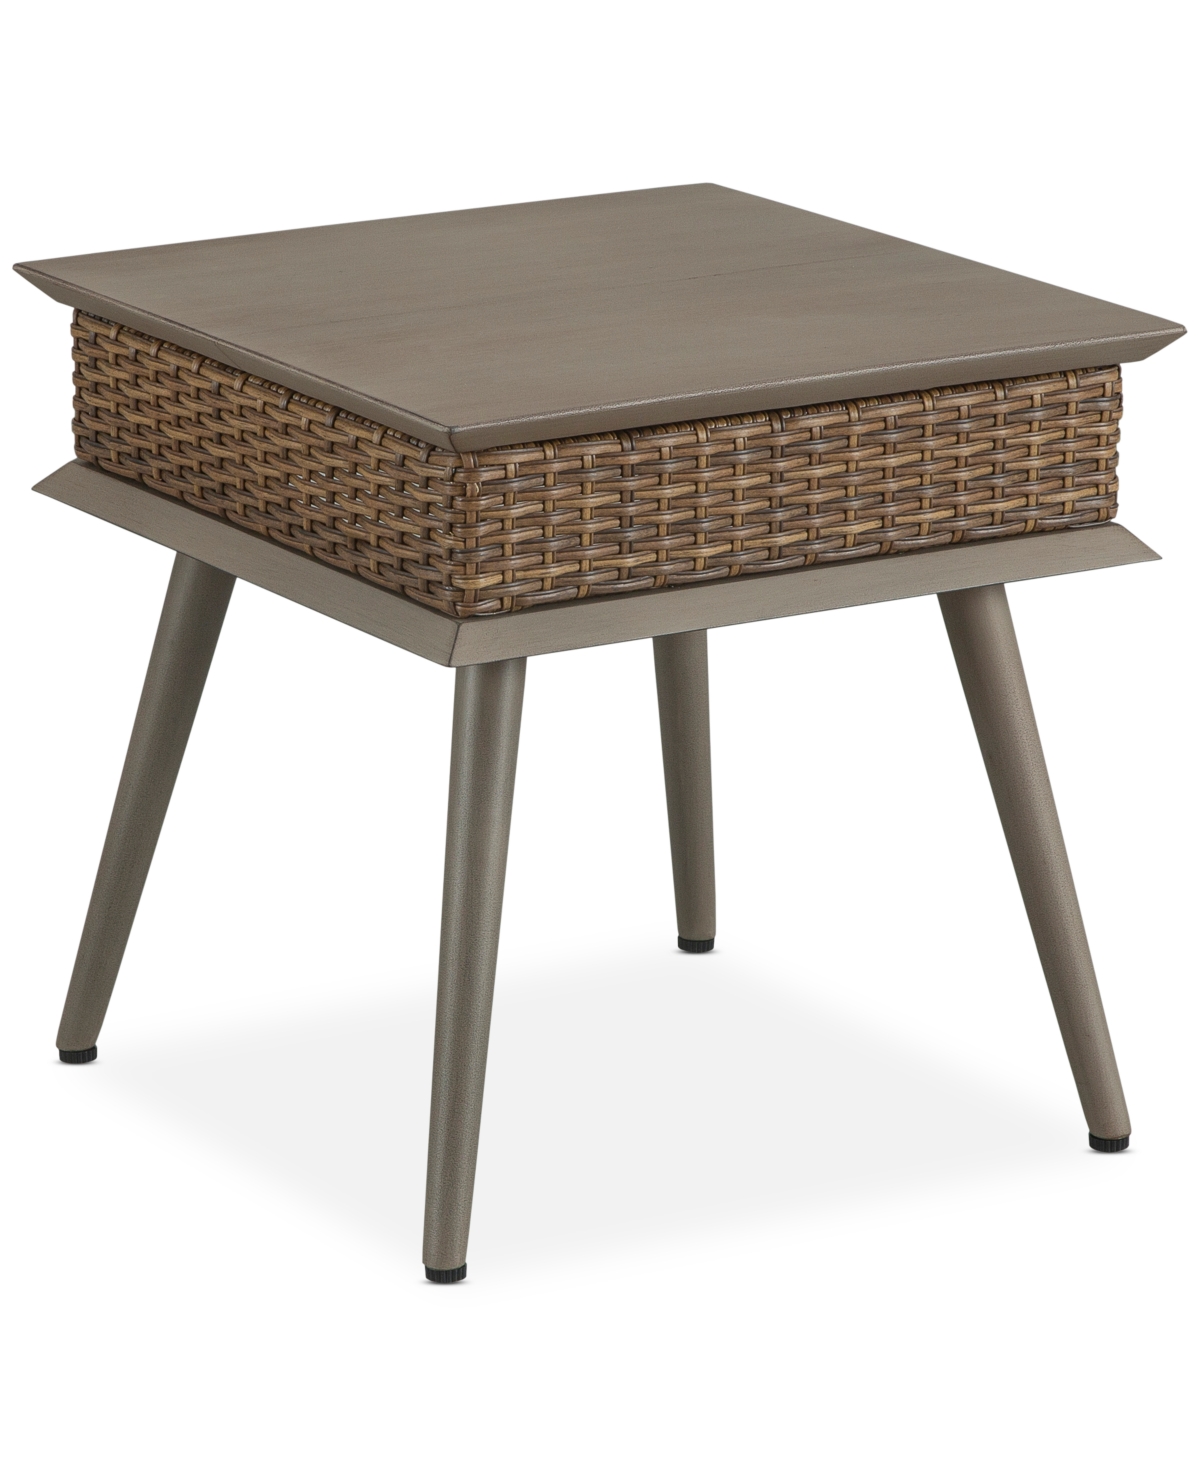 Drew & Jonathan Home Skyview Outdoor Side Table